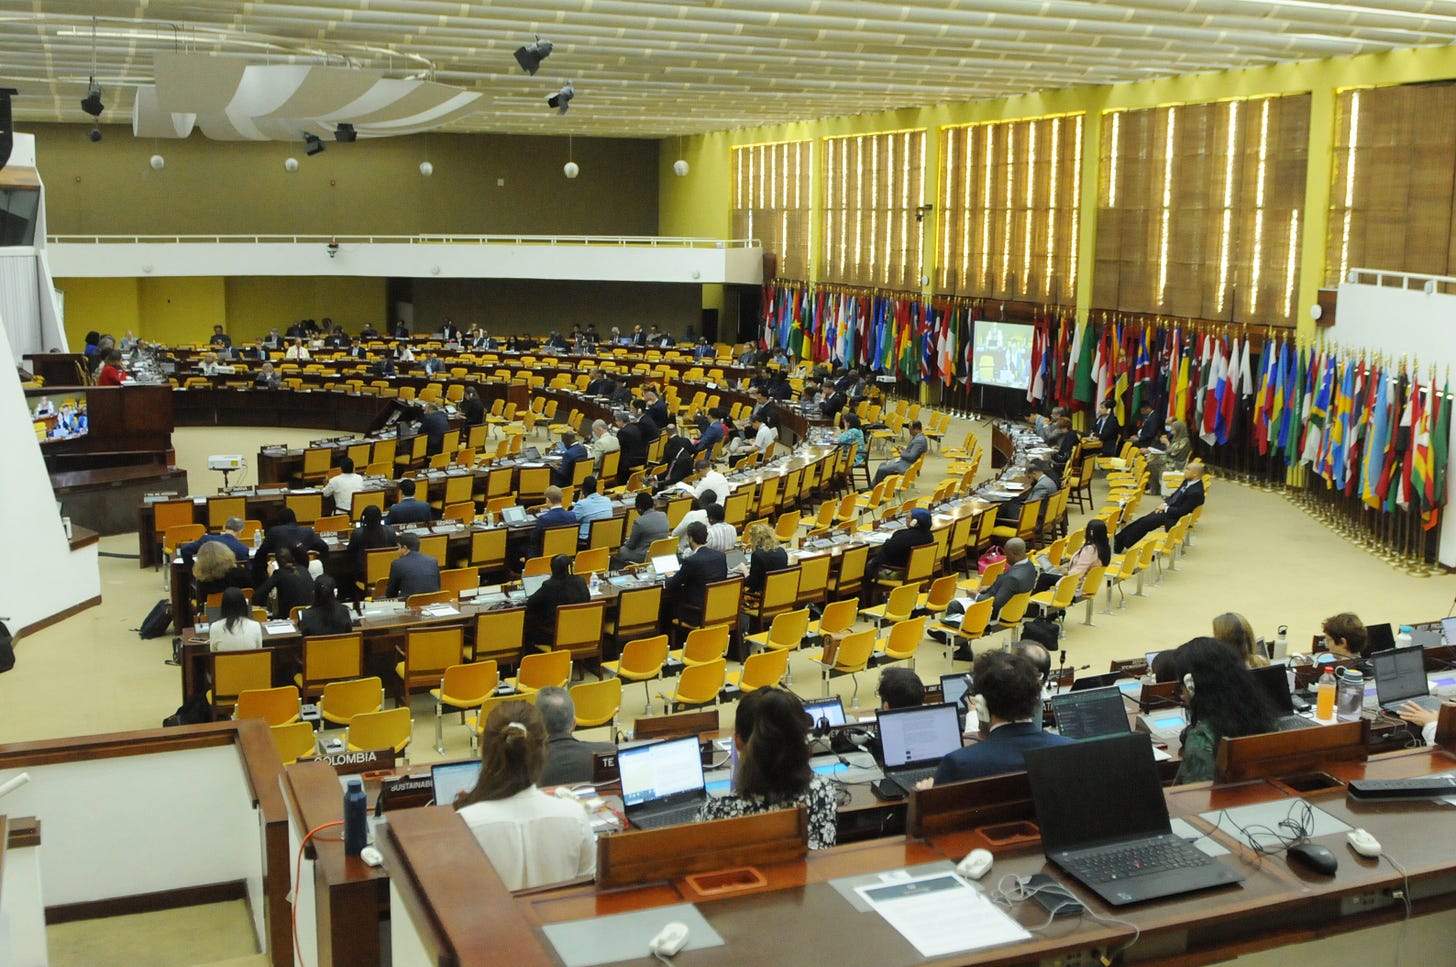 Photo of large conference room filled with people and country flags